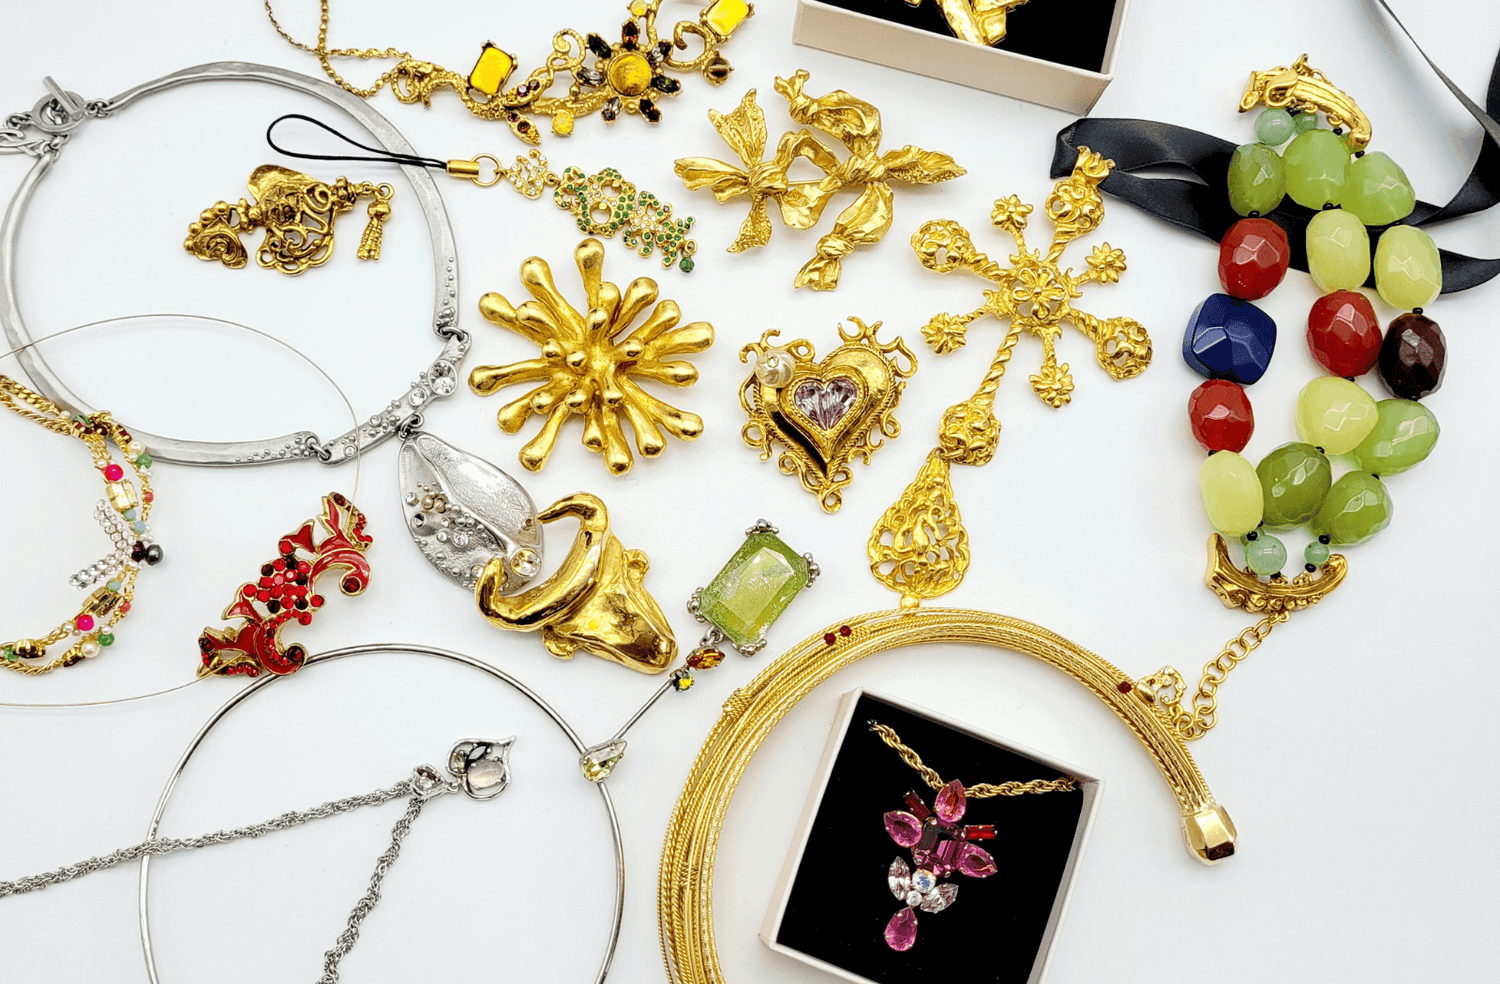 vintage costume jewelry collection